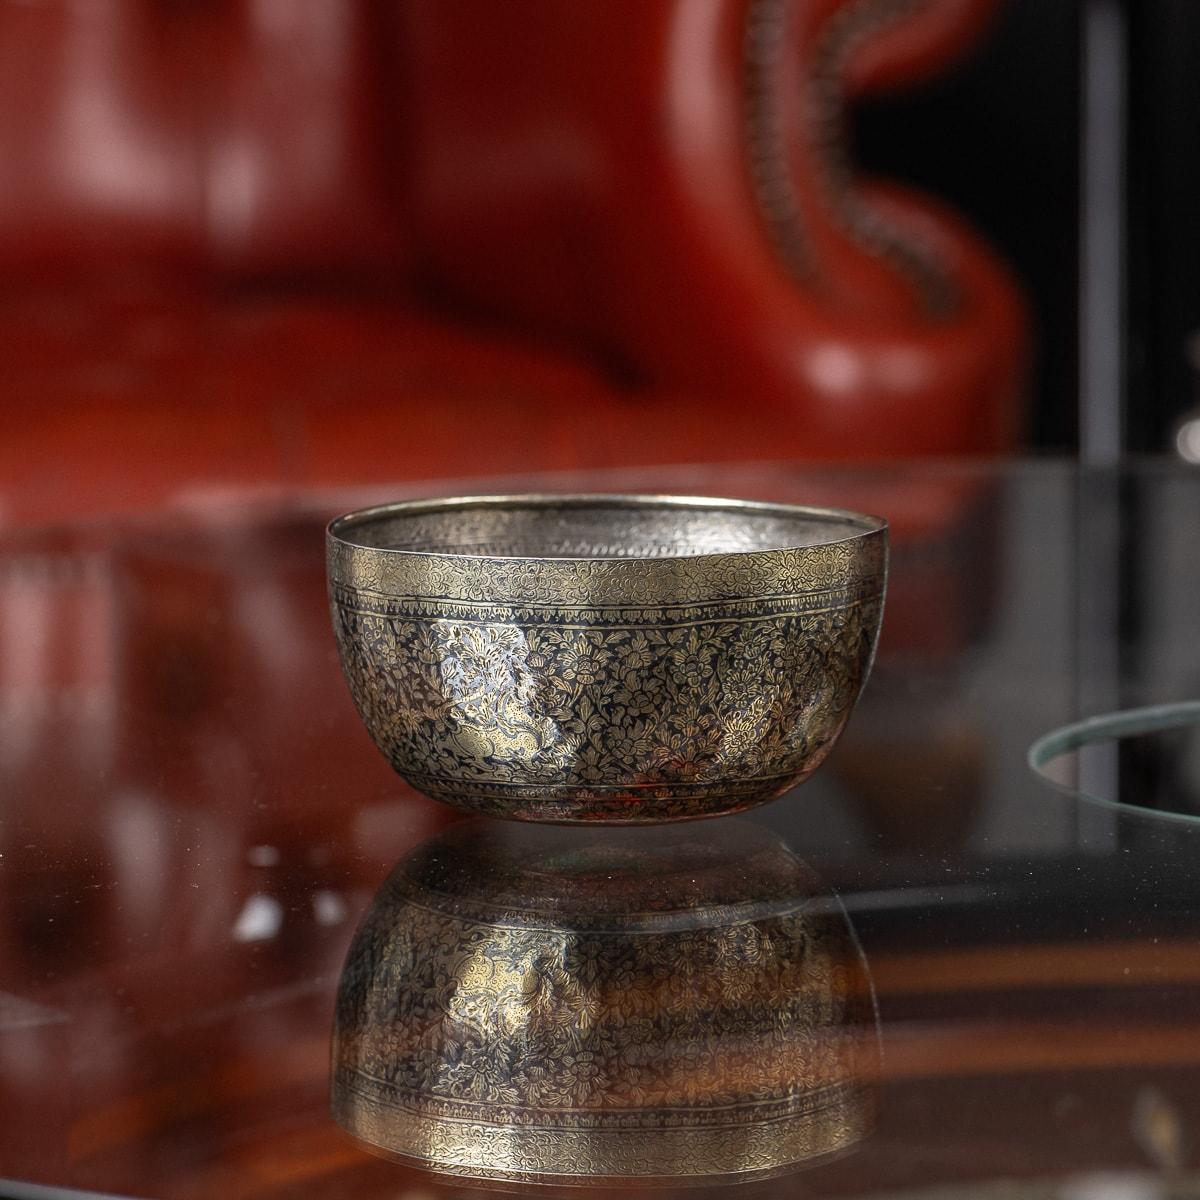 Antique early-19th Century rare fine solid silver niello bowl, repoussé decorated, depicting Singha lions and dense floral gilded decoration throughout. Nielloware art and jewellery has always been very popular in Thailand, However, the niello